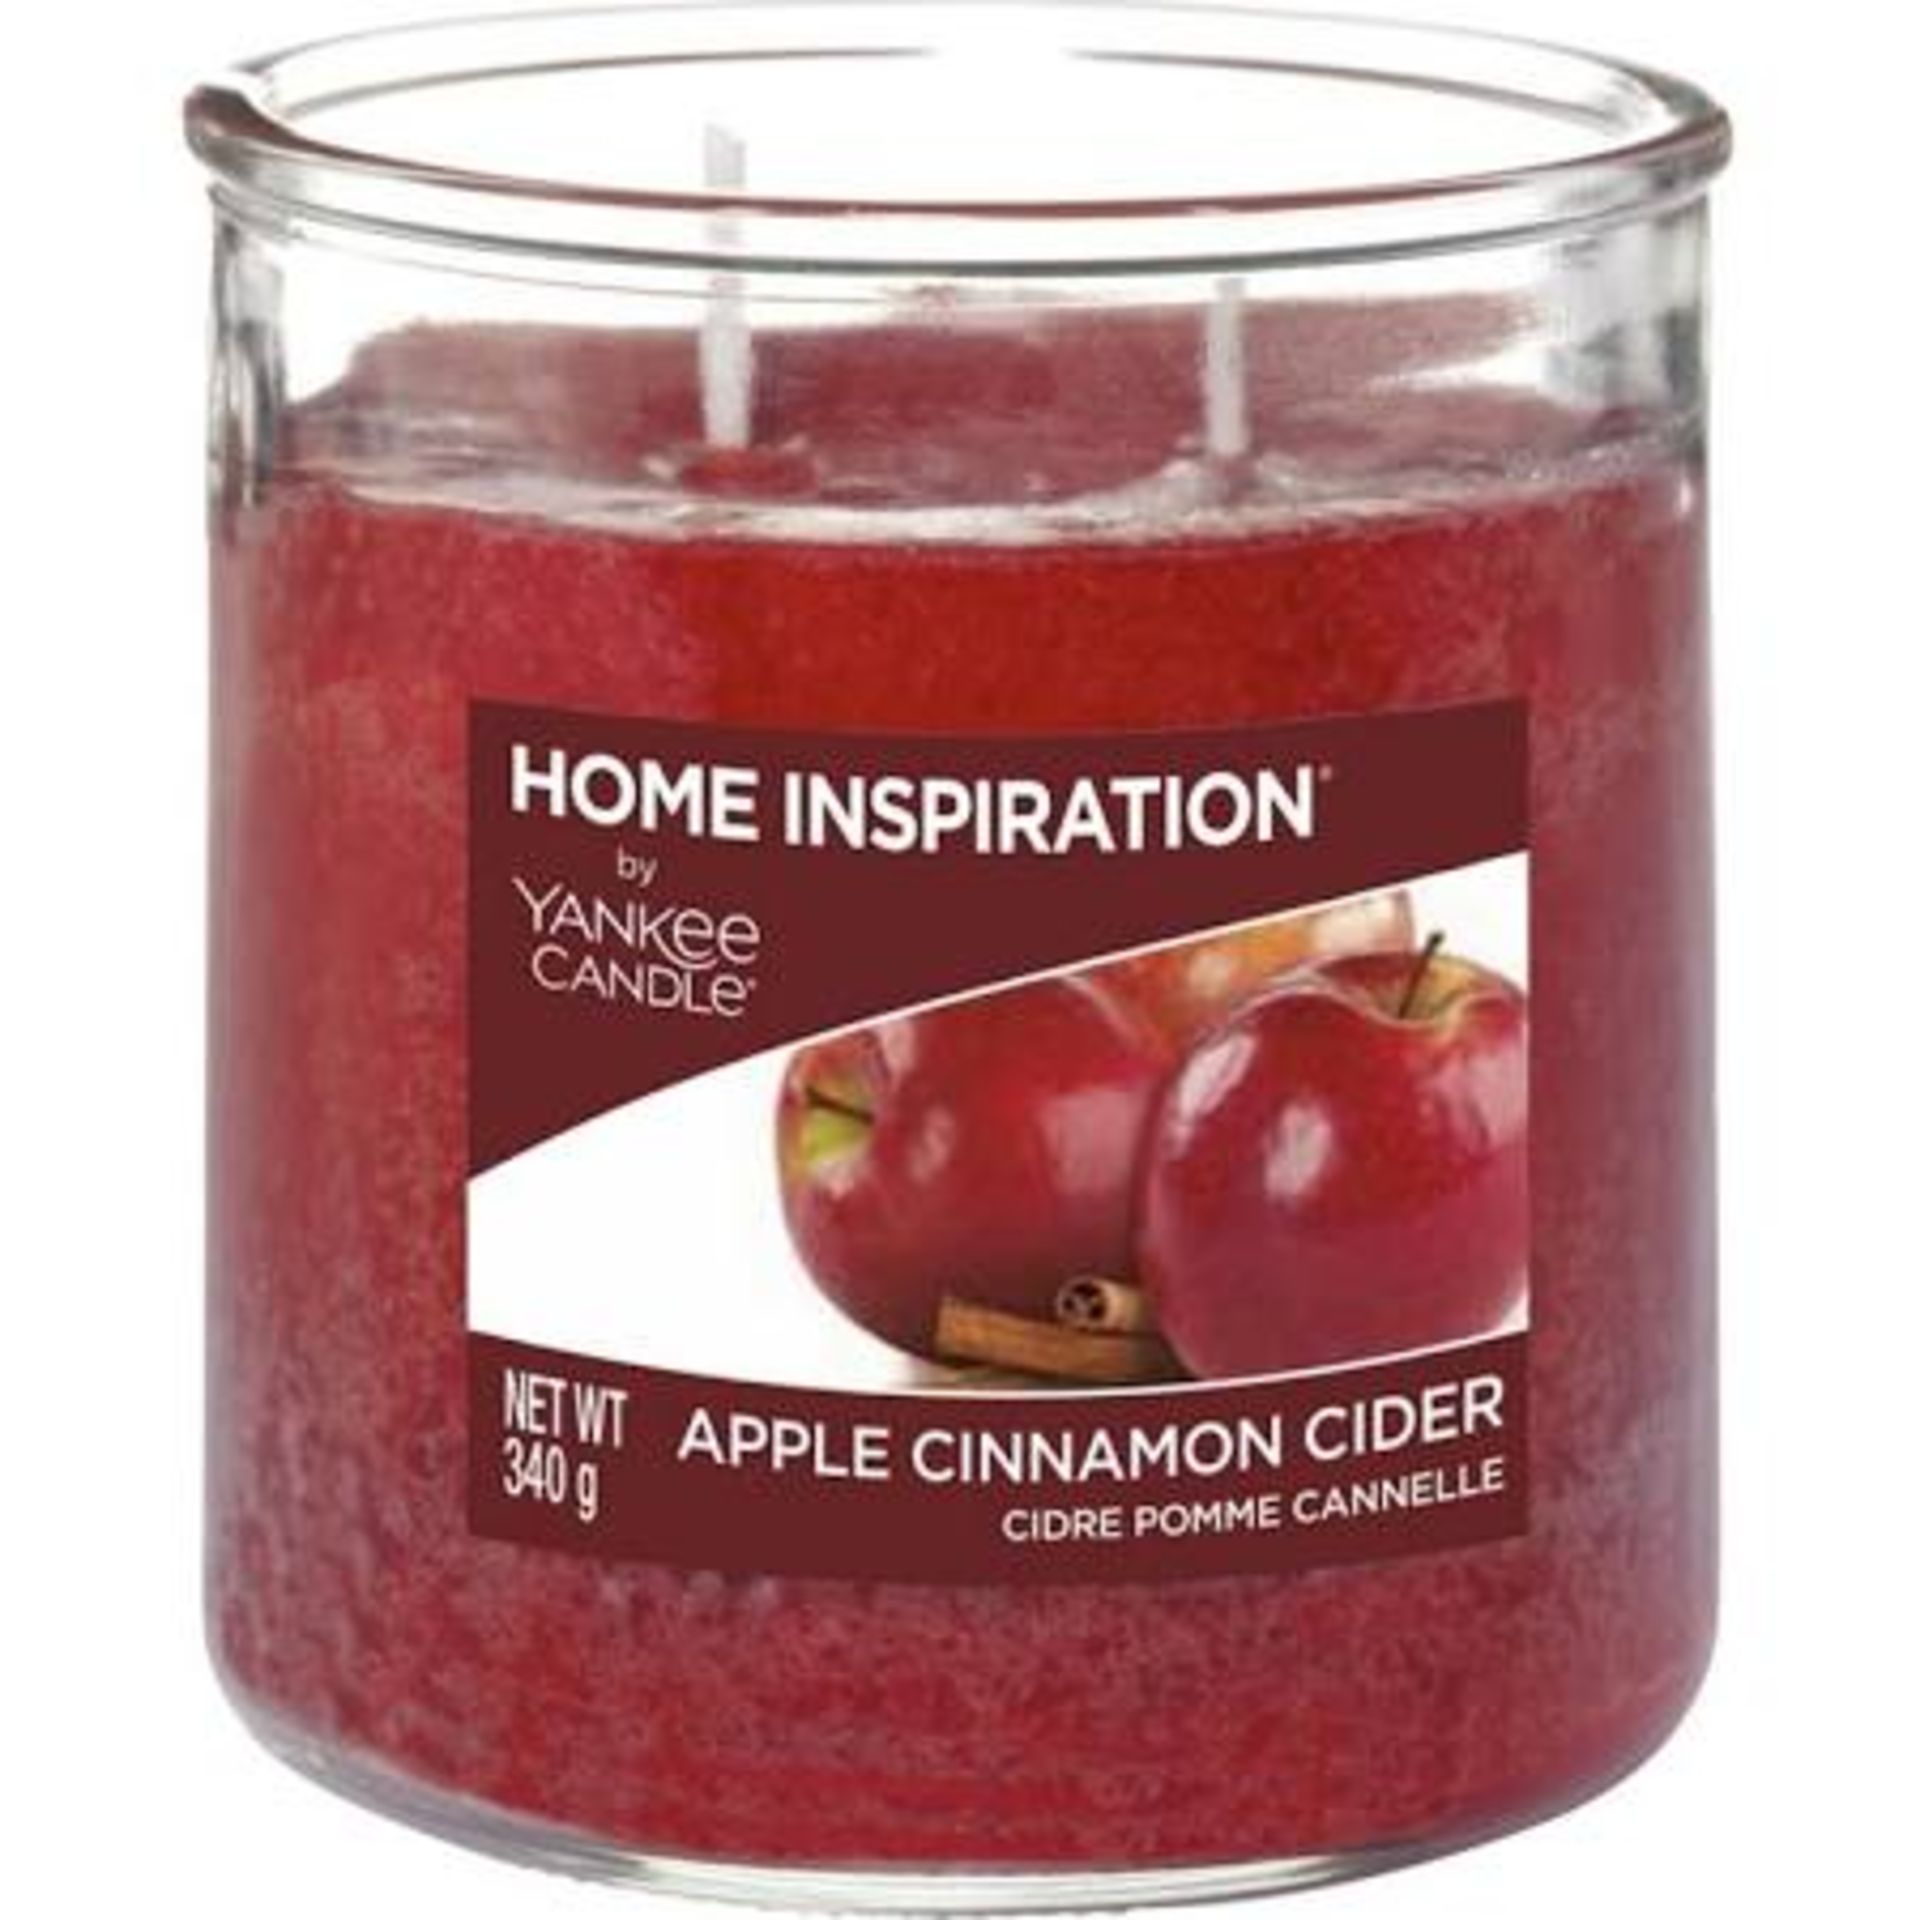 V Brand New Home Inspiration by Yankee Candle Apple Cinnamon Cider 198g Tumbler Candle - ISP £7.99